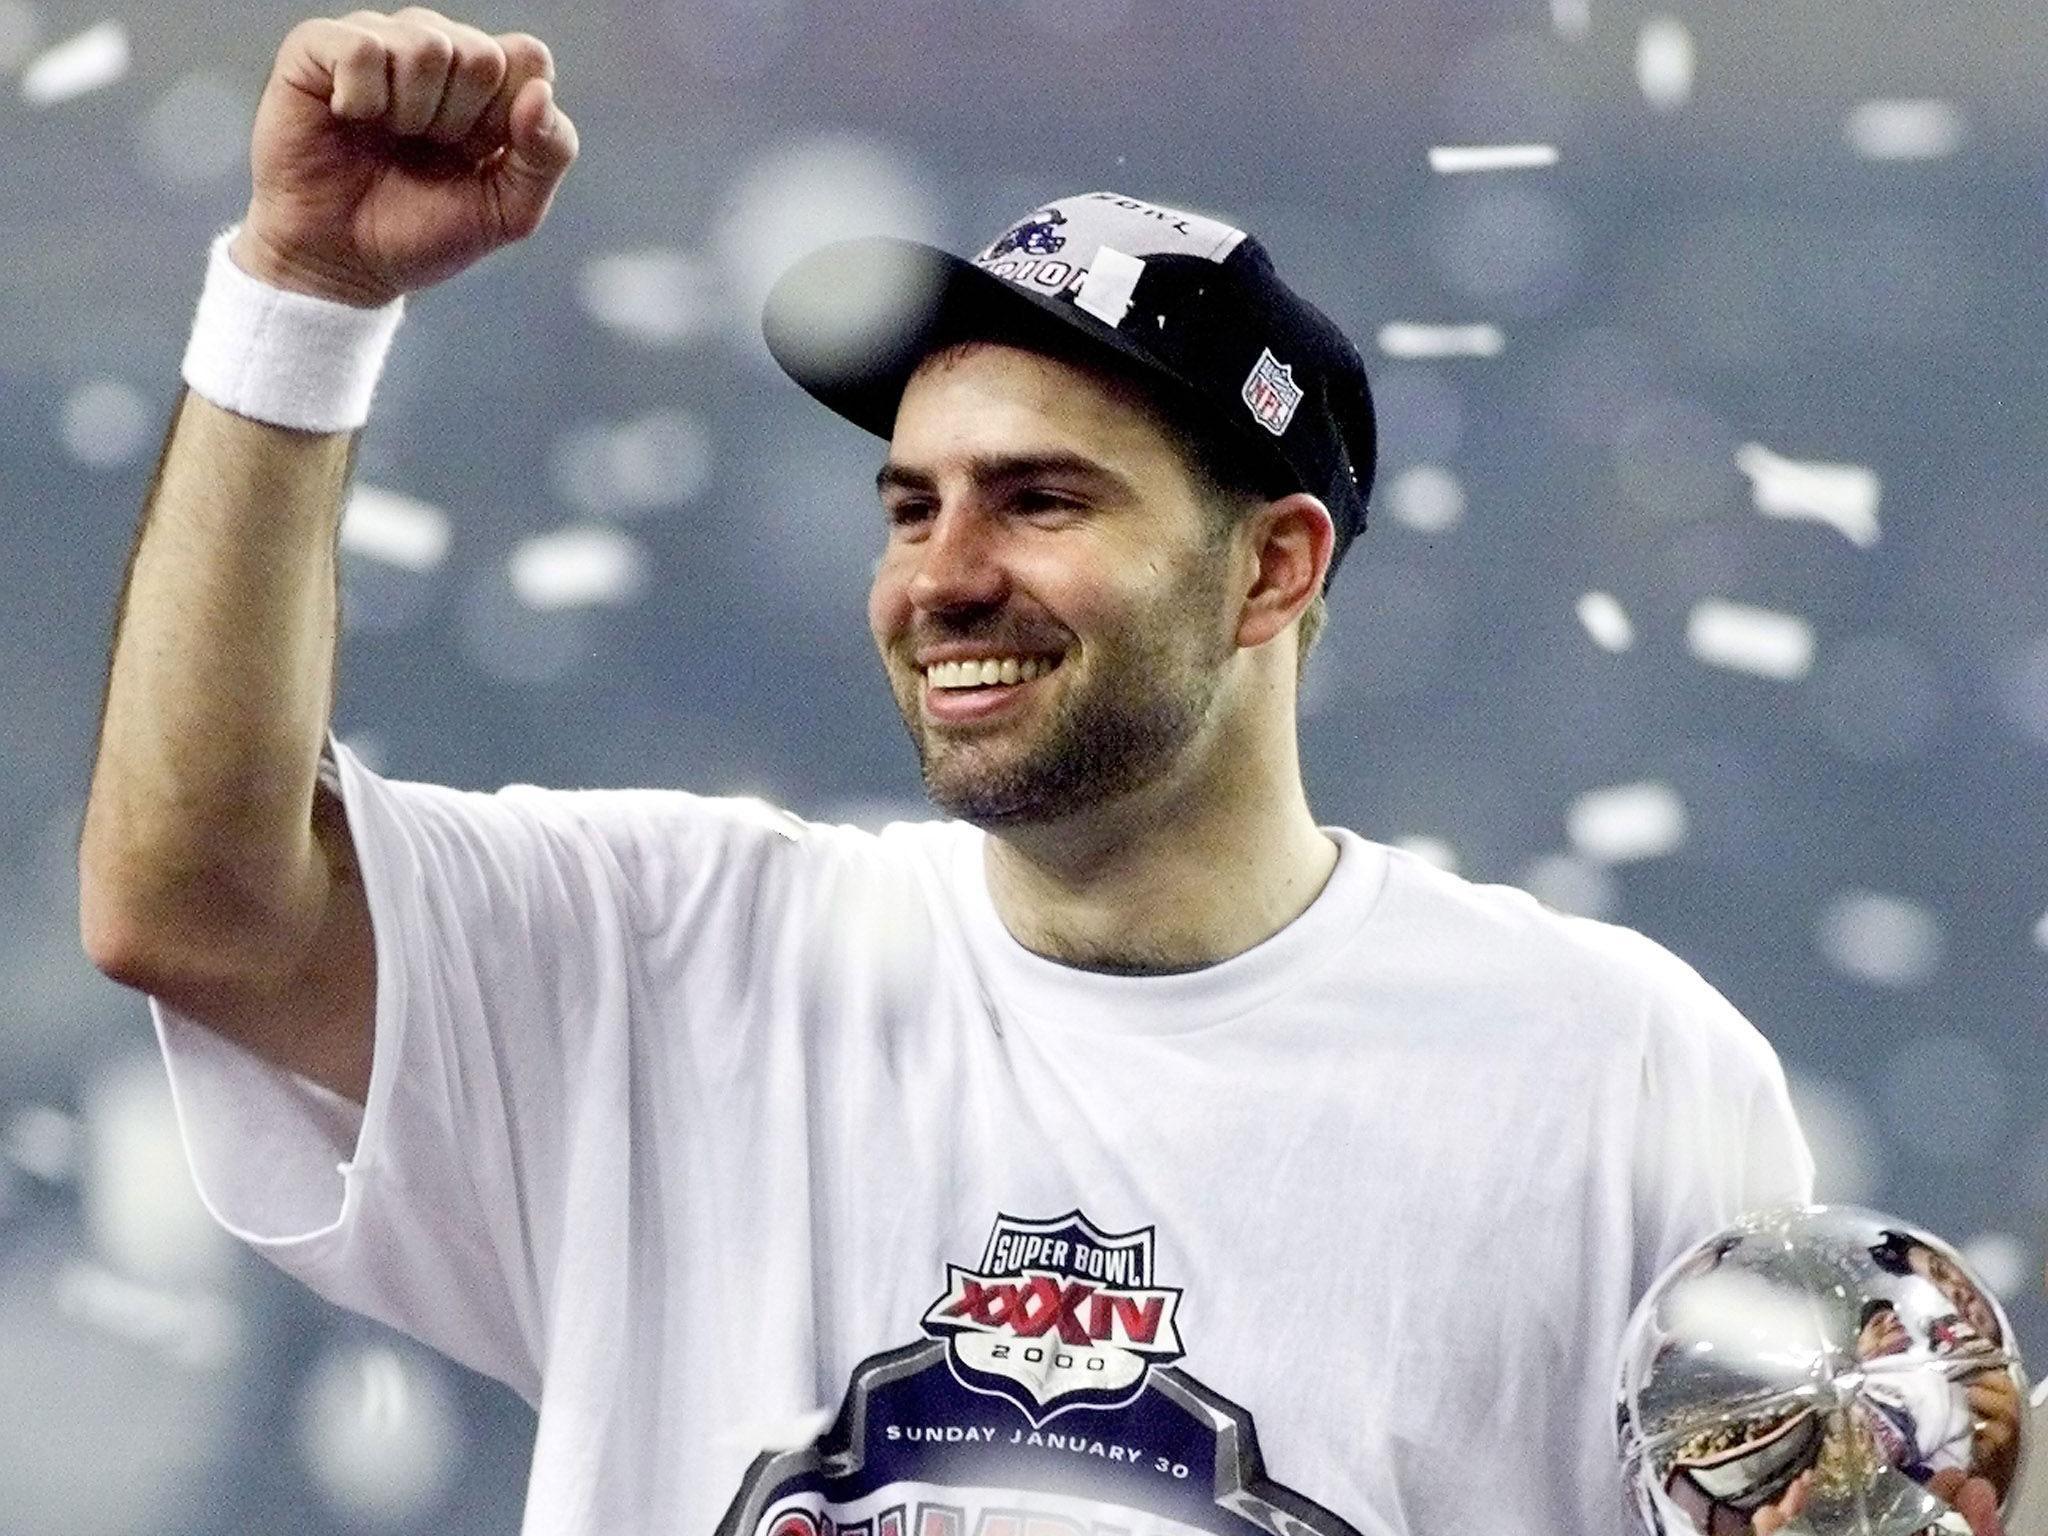 Kurt Warner went from undrafted all the way to the Super Bowl